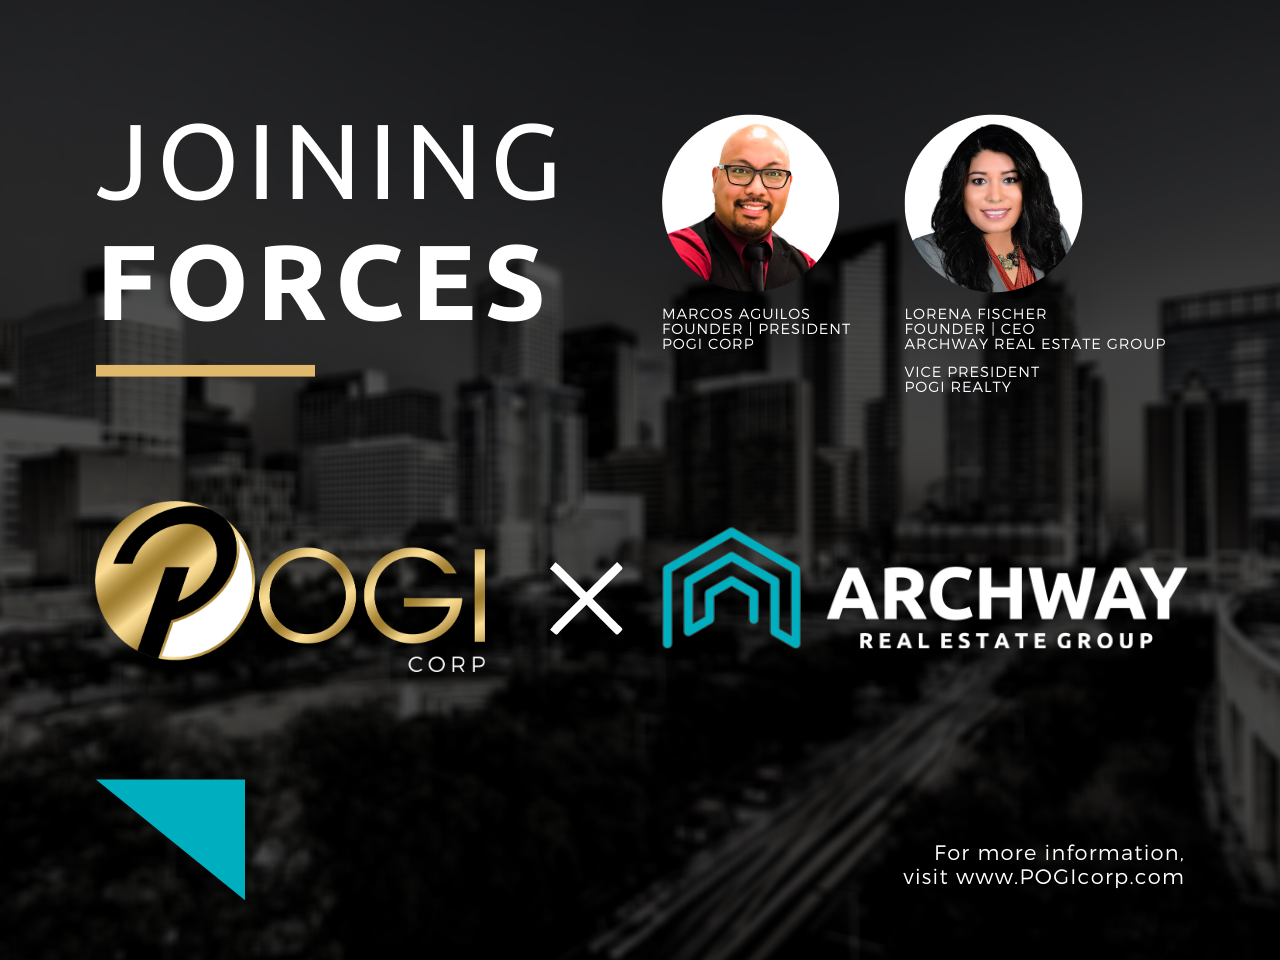 Pogi Corp Joins Forces With Archway Real Estate Group